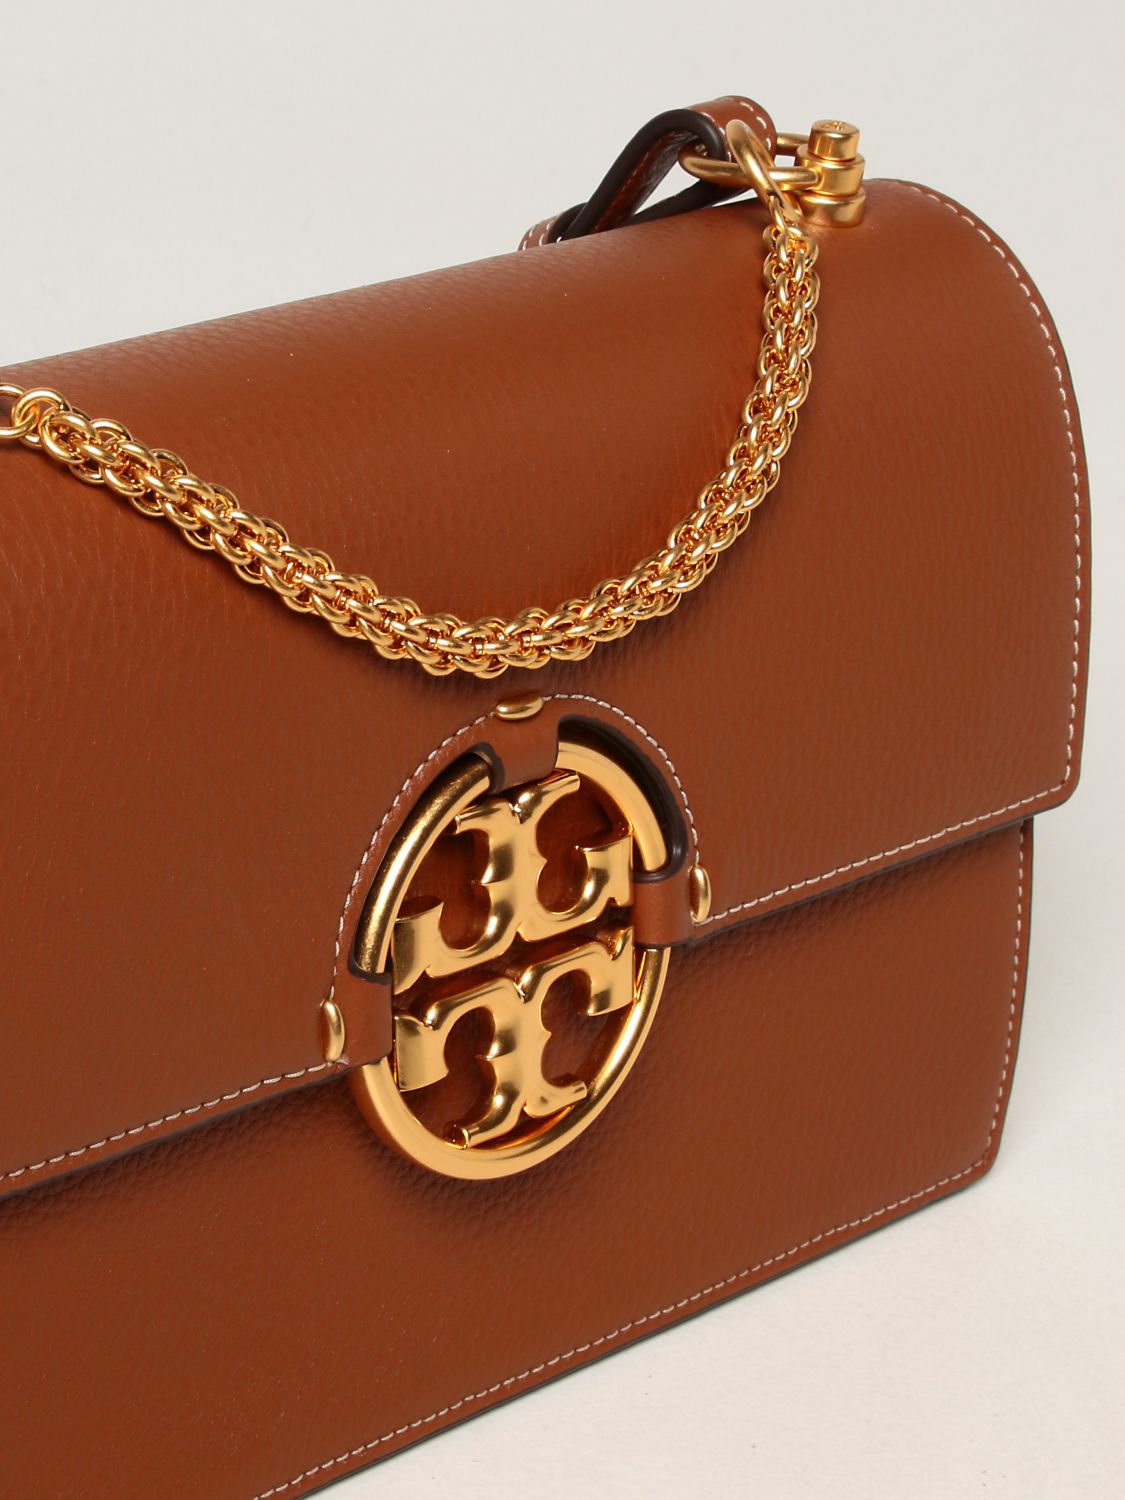 Leather handbag Tory Burch Beige in Leather - 24955707